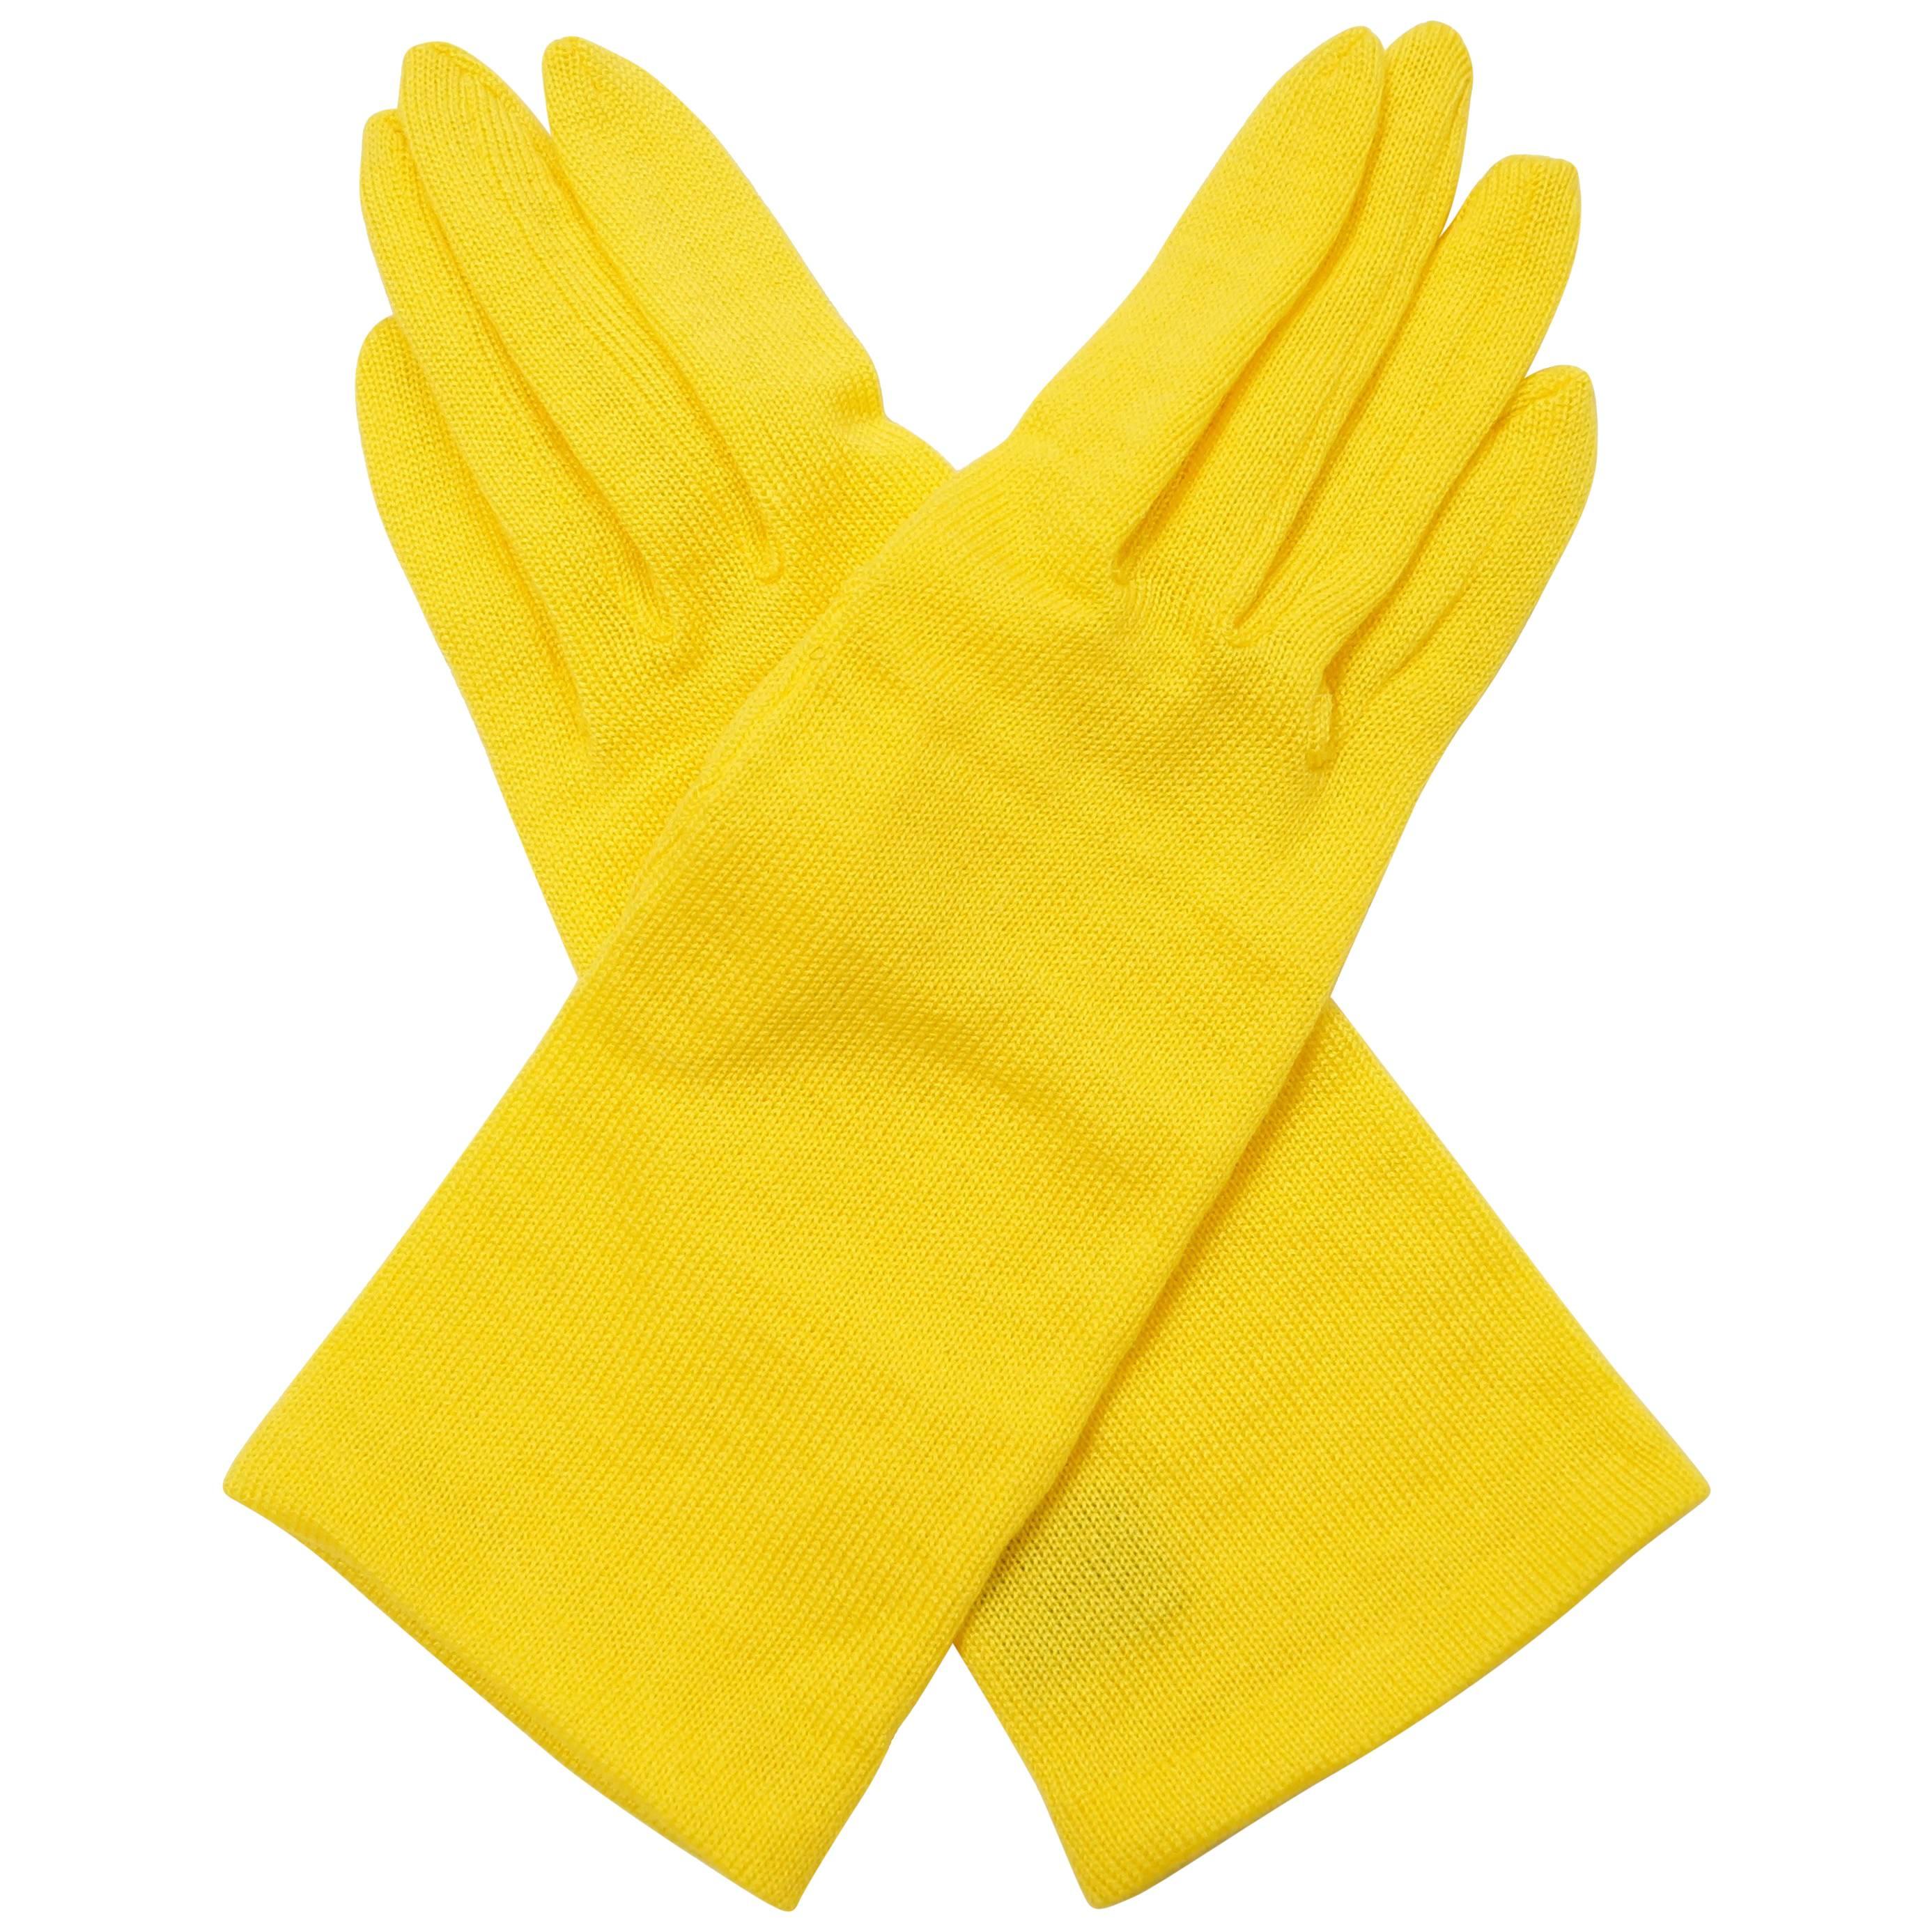 Dramatic canary yellow knit wool blend gloves by Yohji Yamamoro. Gloves reach above the wrist, are soft and loosely knit, with rounded fingertips. Seams at sides and thumb. Medium.